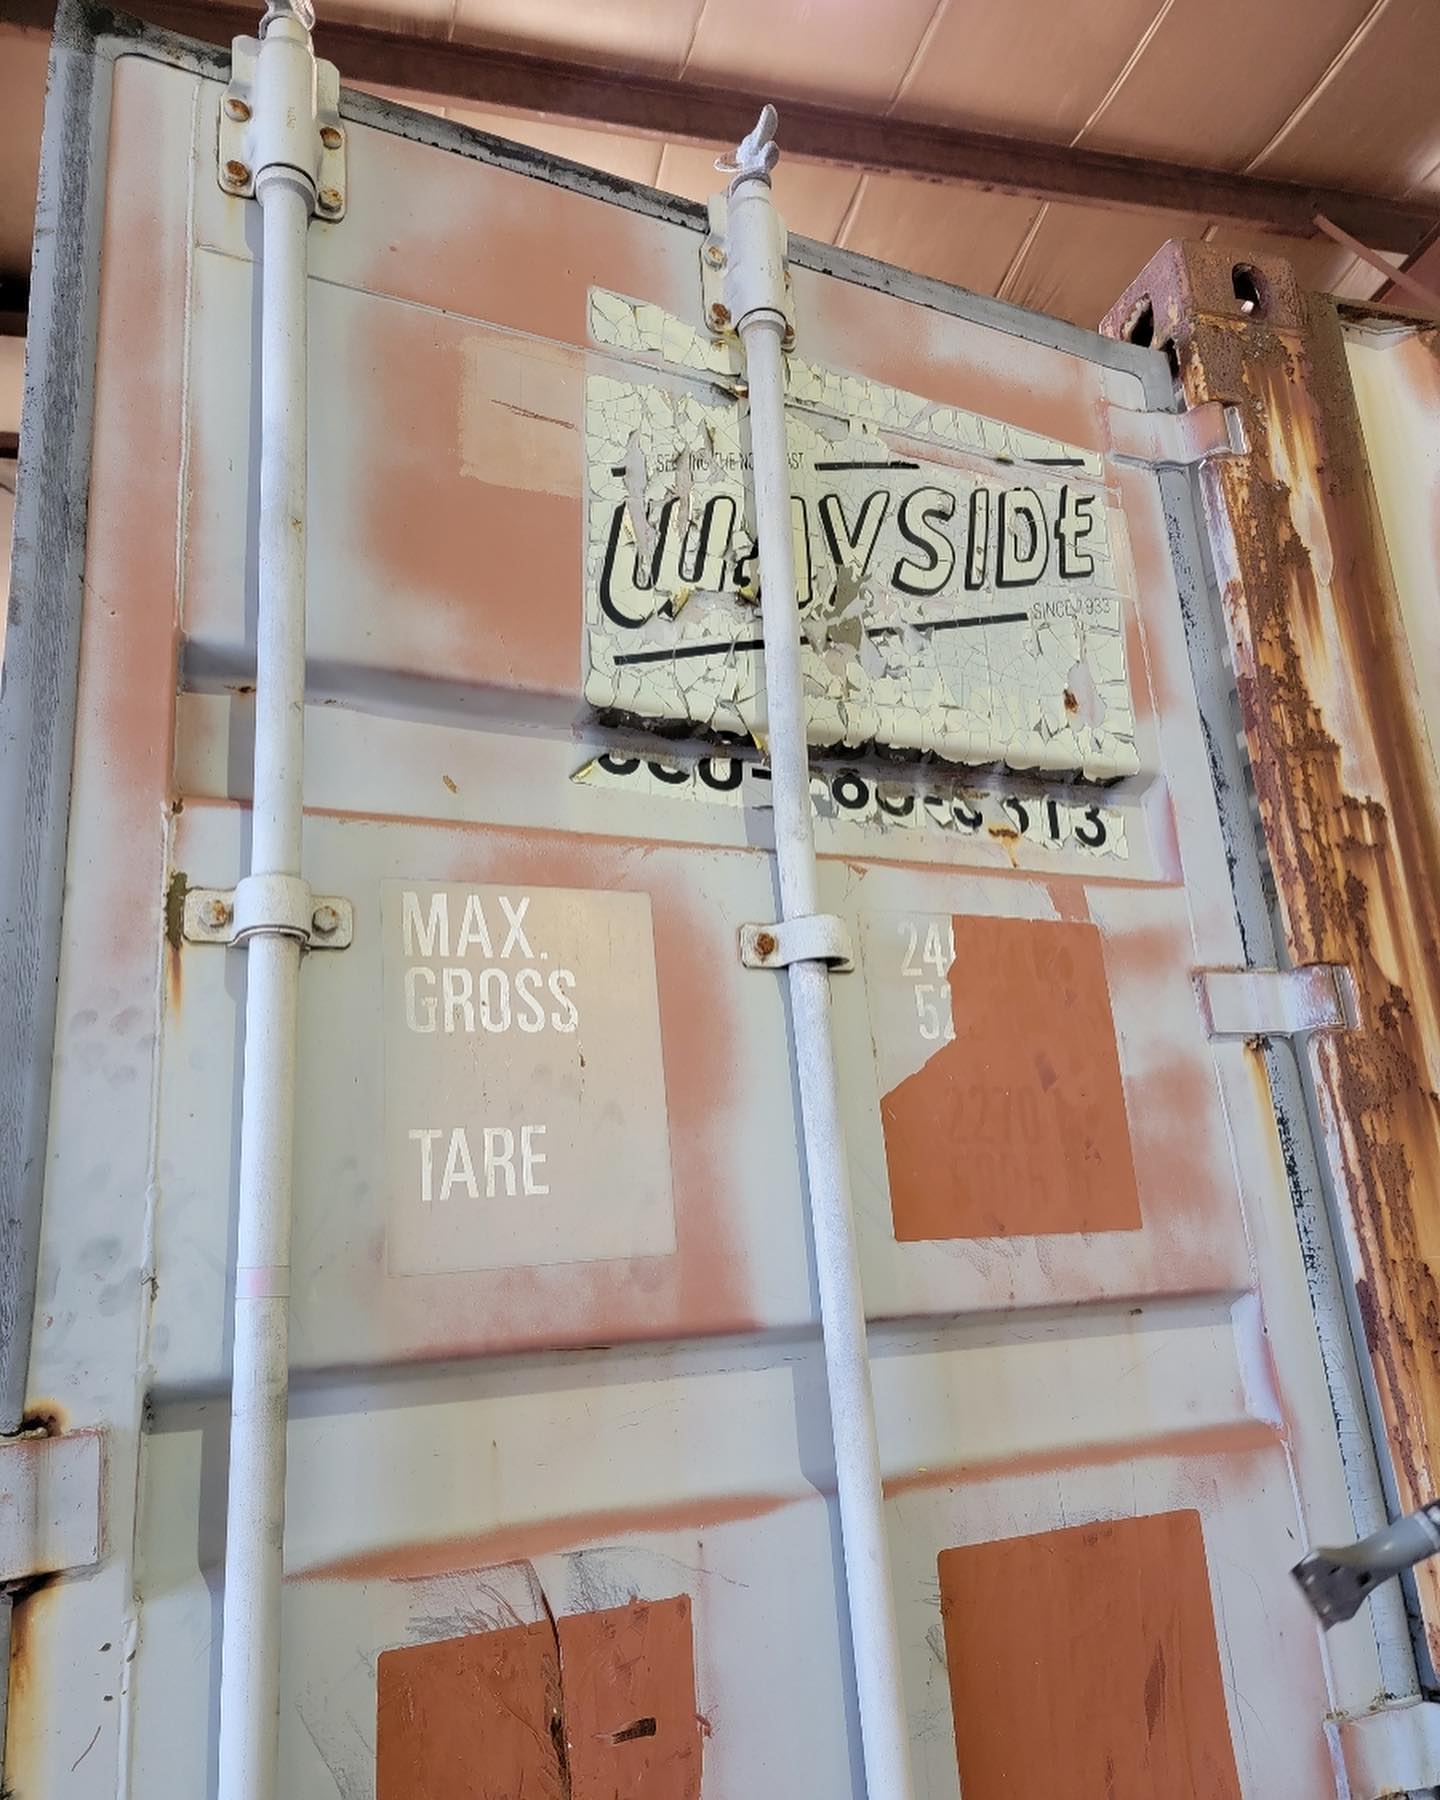 A rusty container with a sign on it.